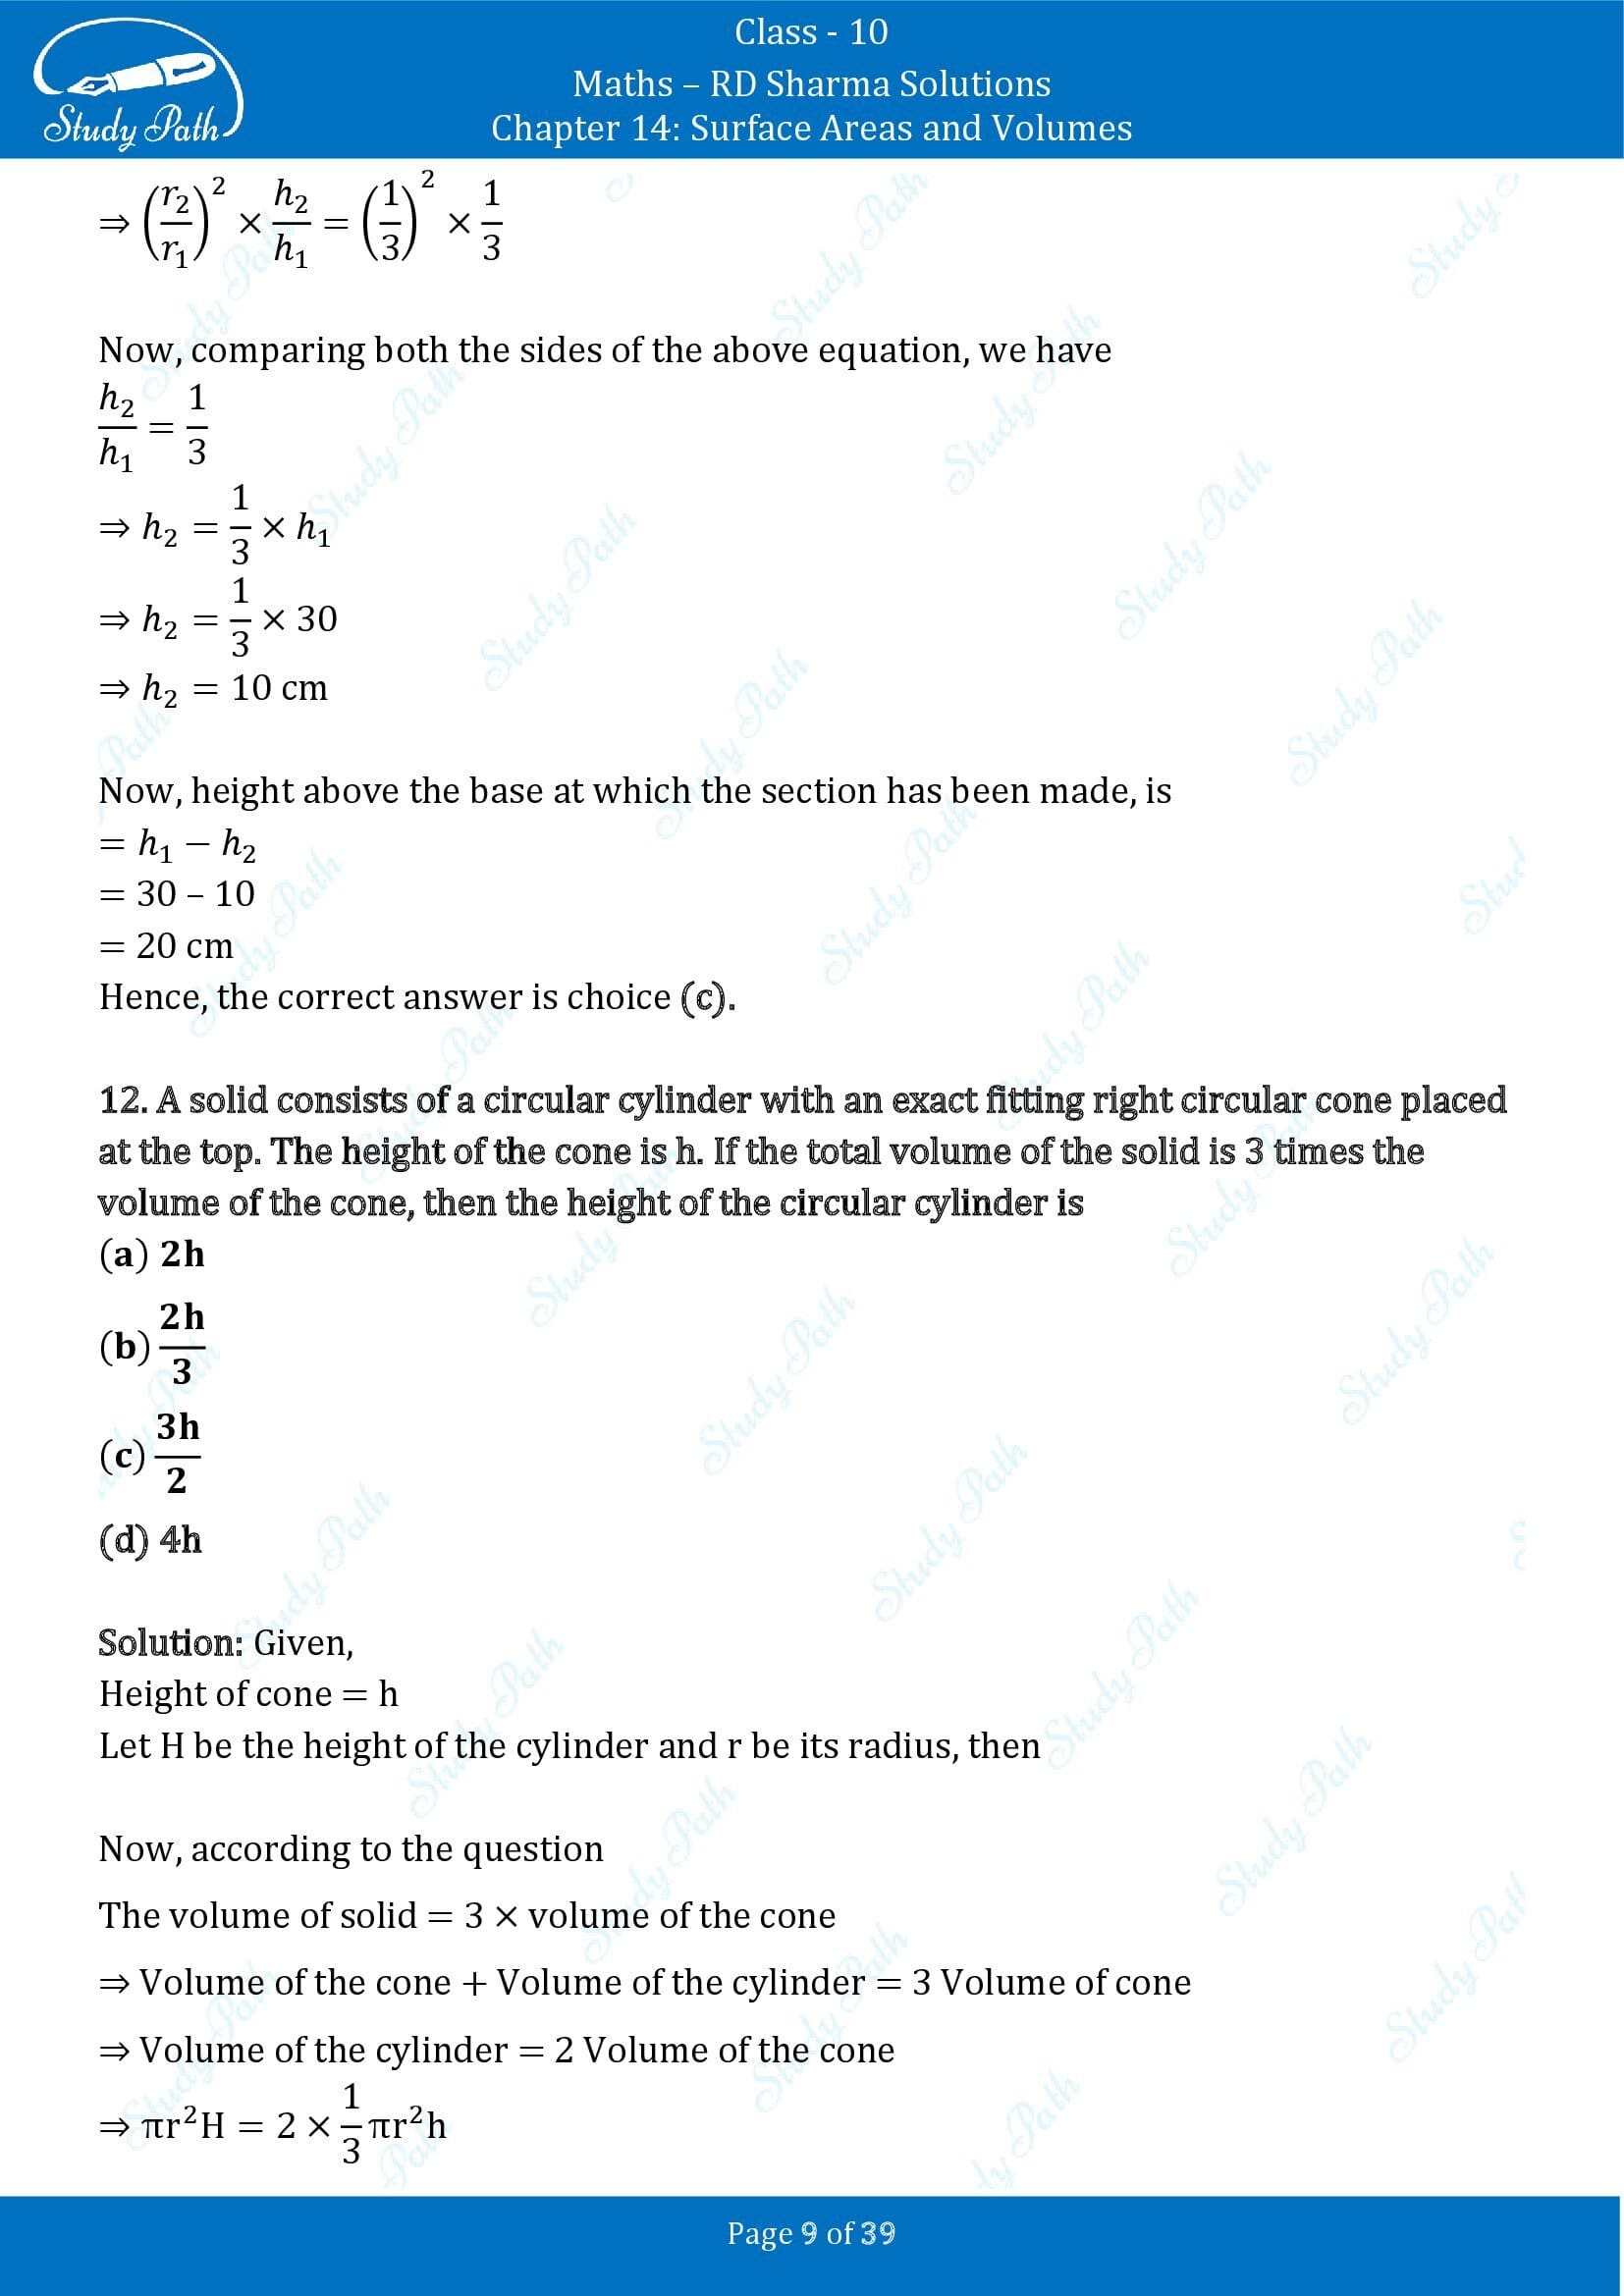 RD Sharma Solutions Class 10 Chapter 14 Surface Areas and Volumes Multiple Choice Question MCQs 00009